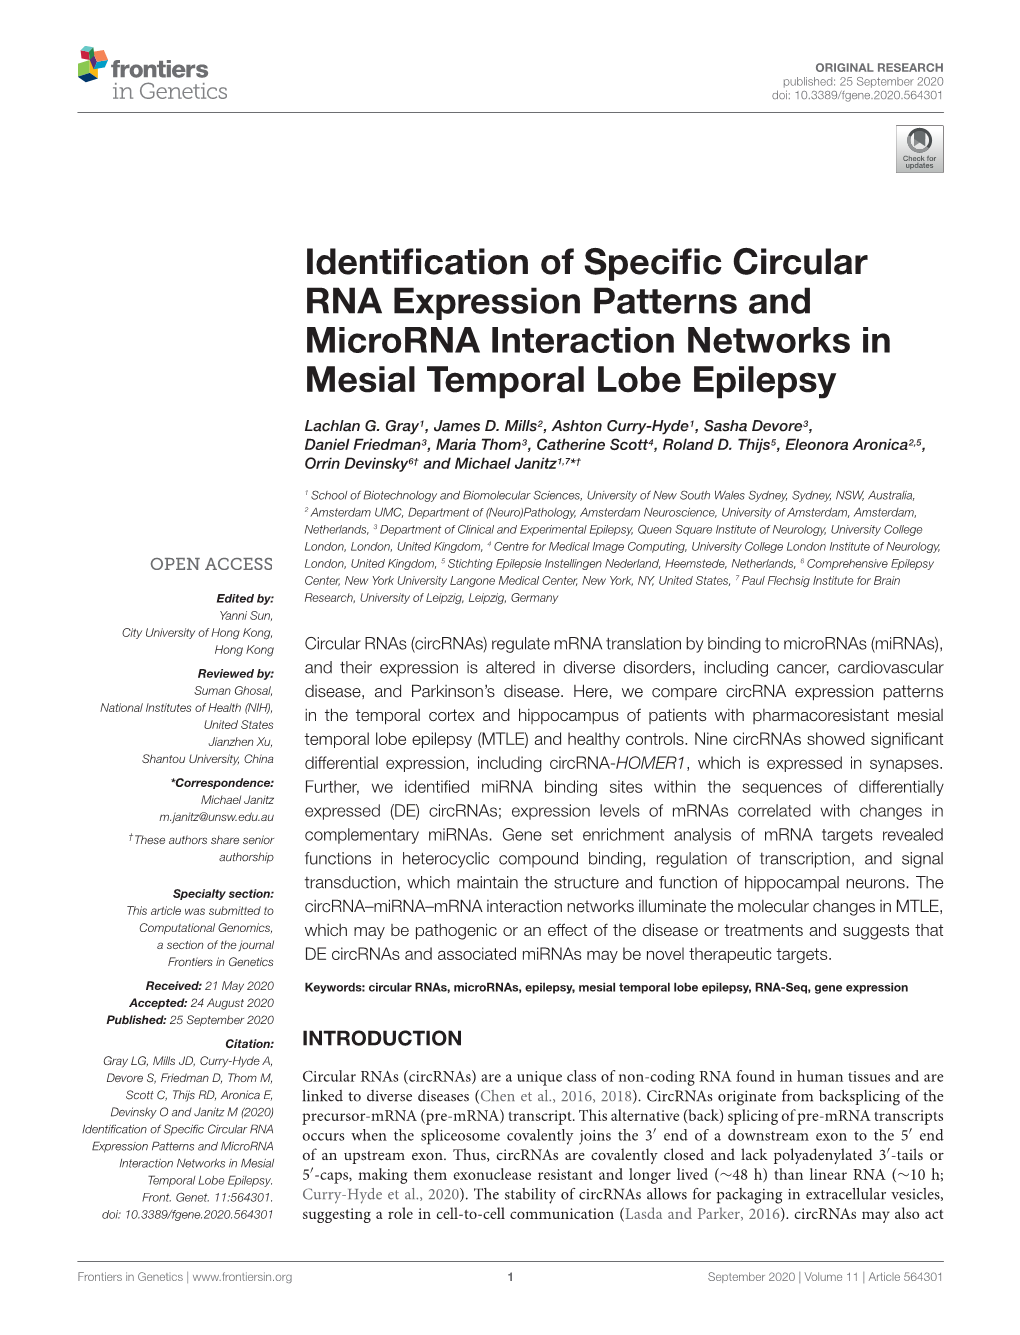 Identification of Specific Circular RNA Expression Patterns and Microrna